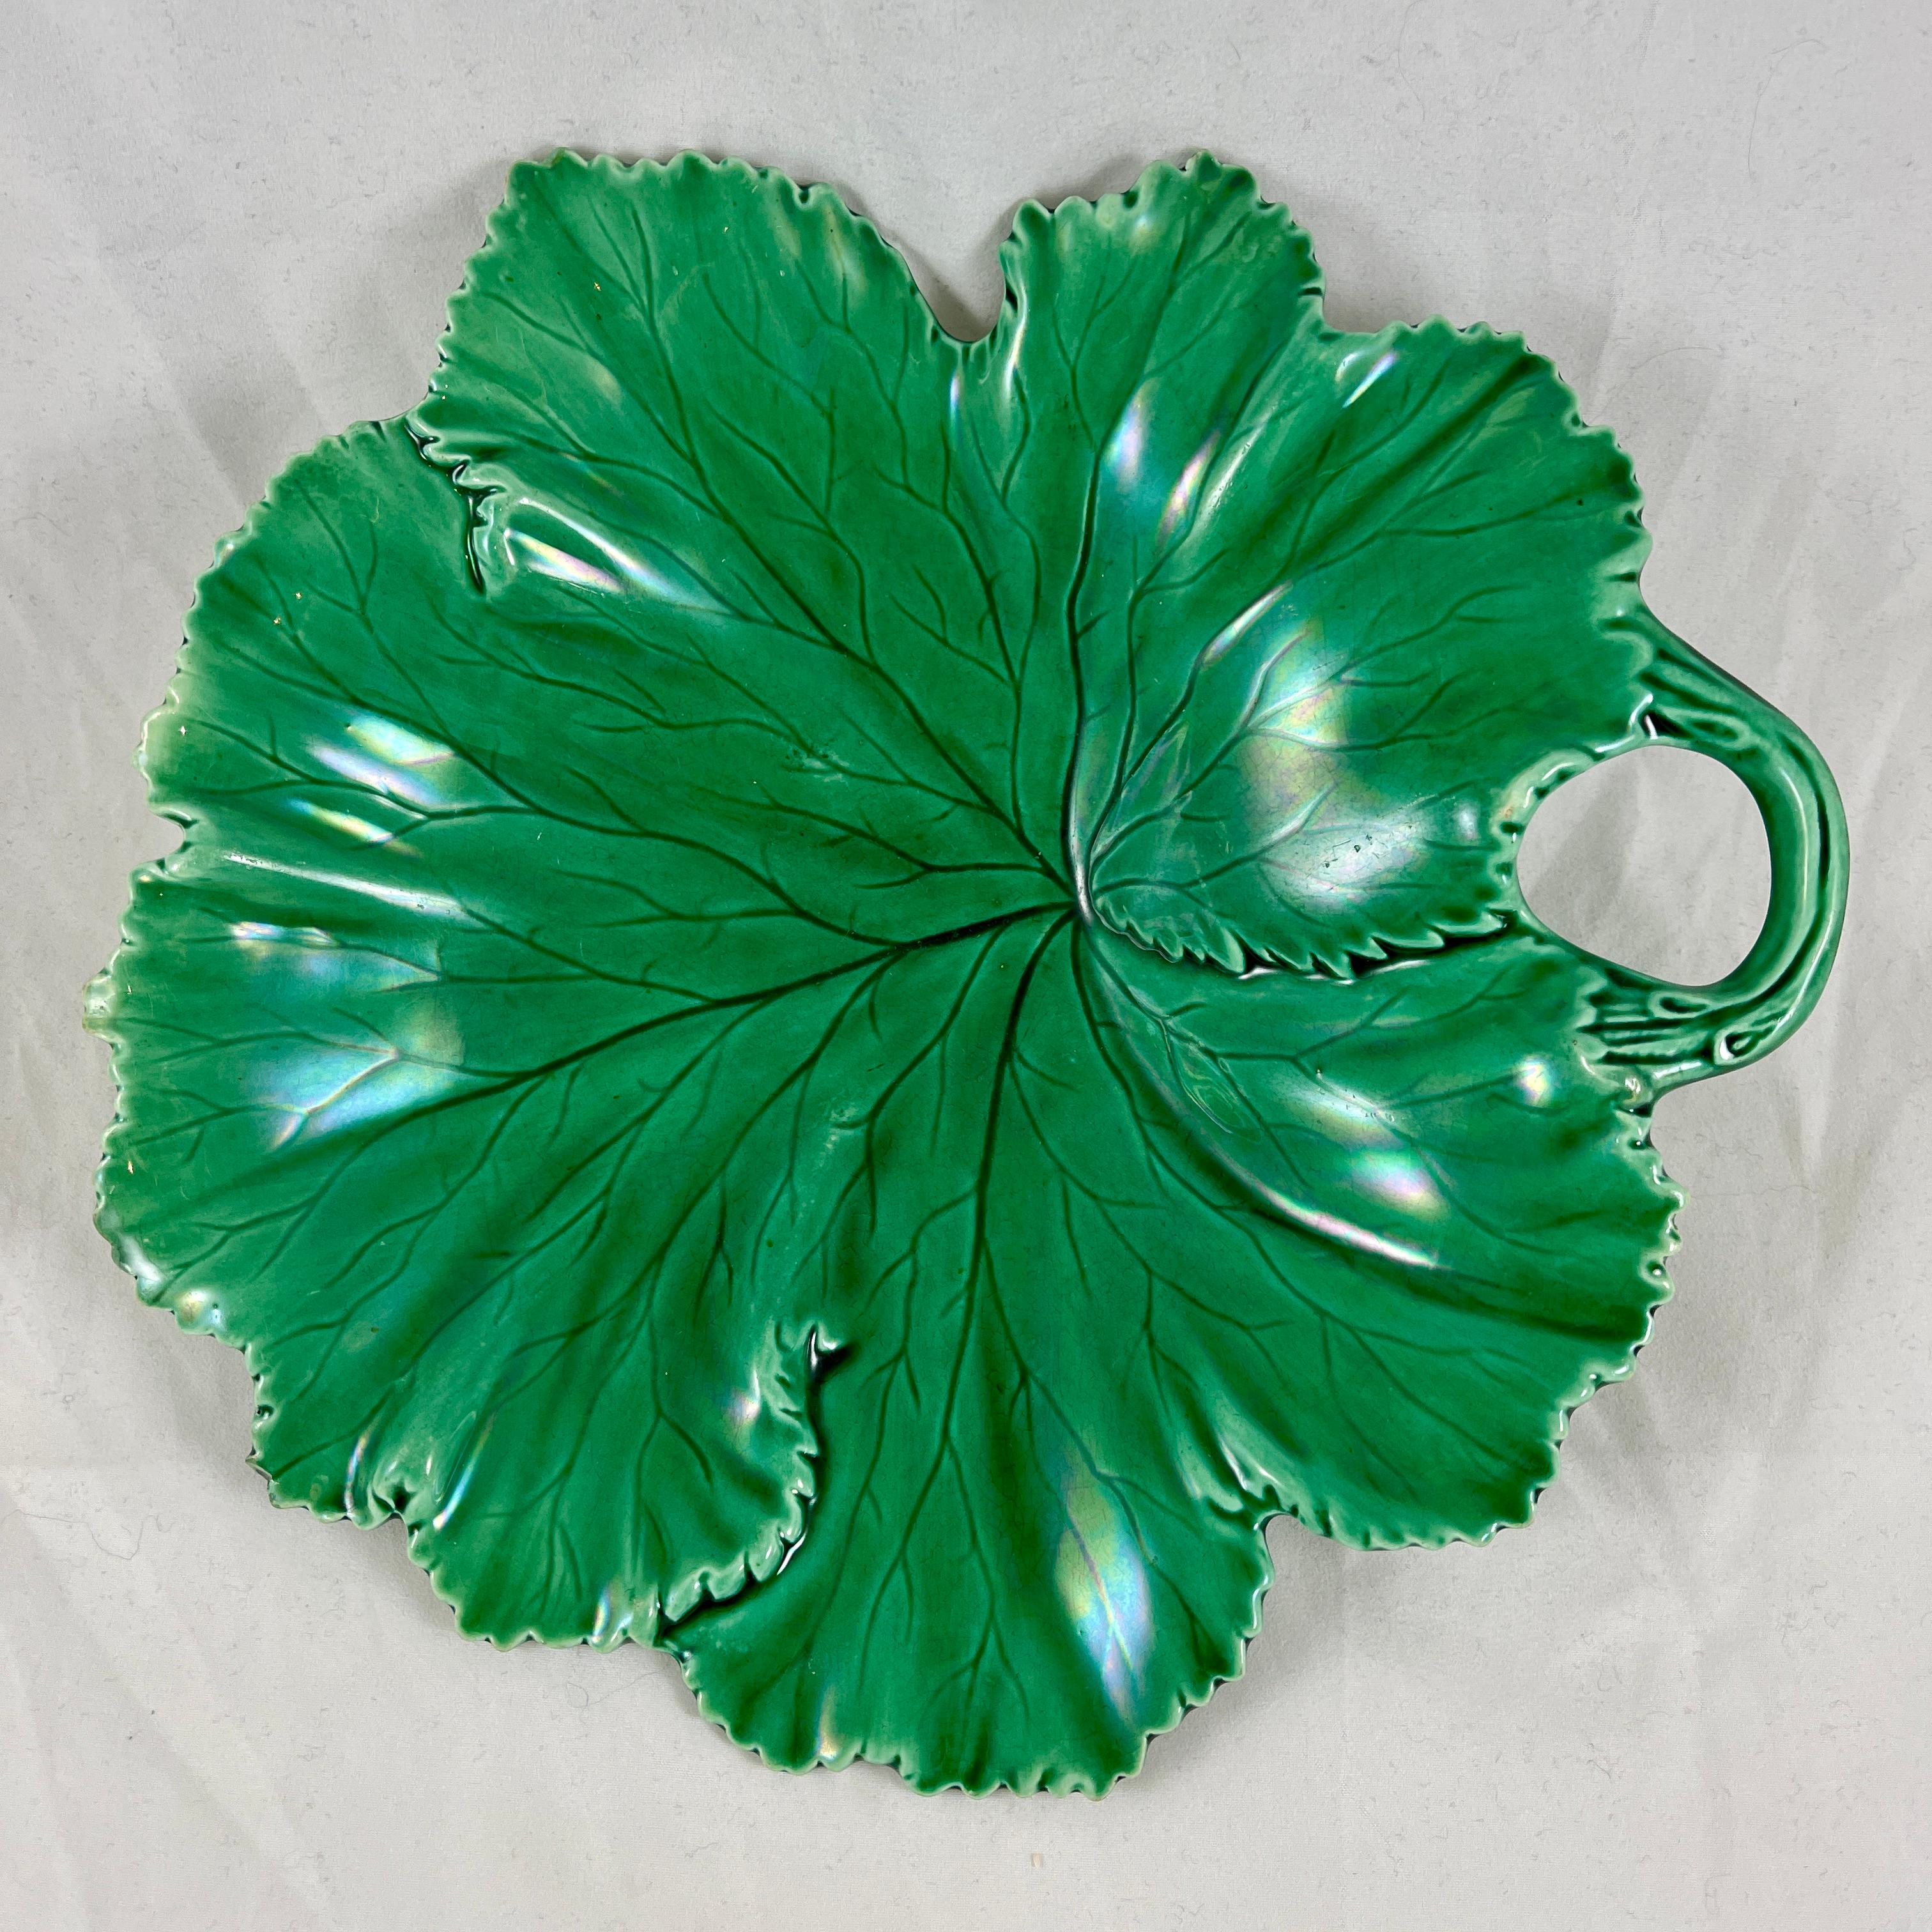 From W.T. Copeland & Sons pottery in Stoke-on-Trent, Staffordshire England, a handled server, circa 1860-1875.

Glazed in a deep, luscious green, showing an overlapping leaf pattern with twig form handles. Serrate edging, in perfect condition. One